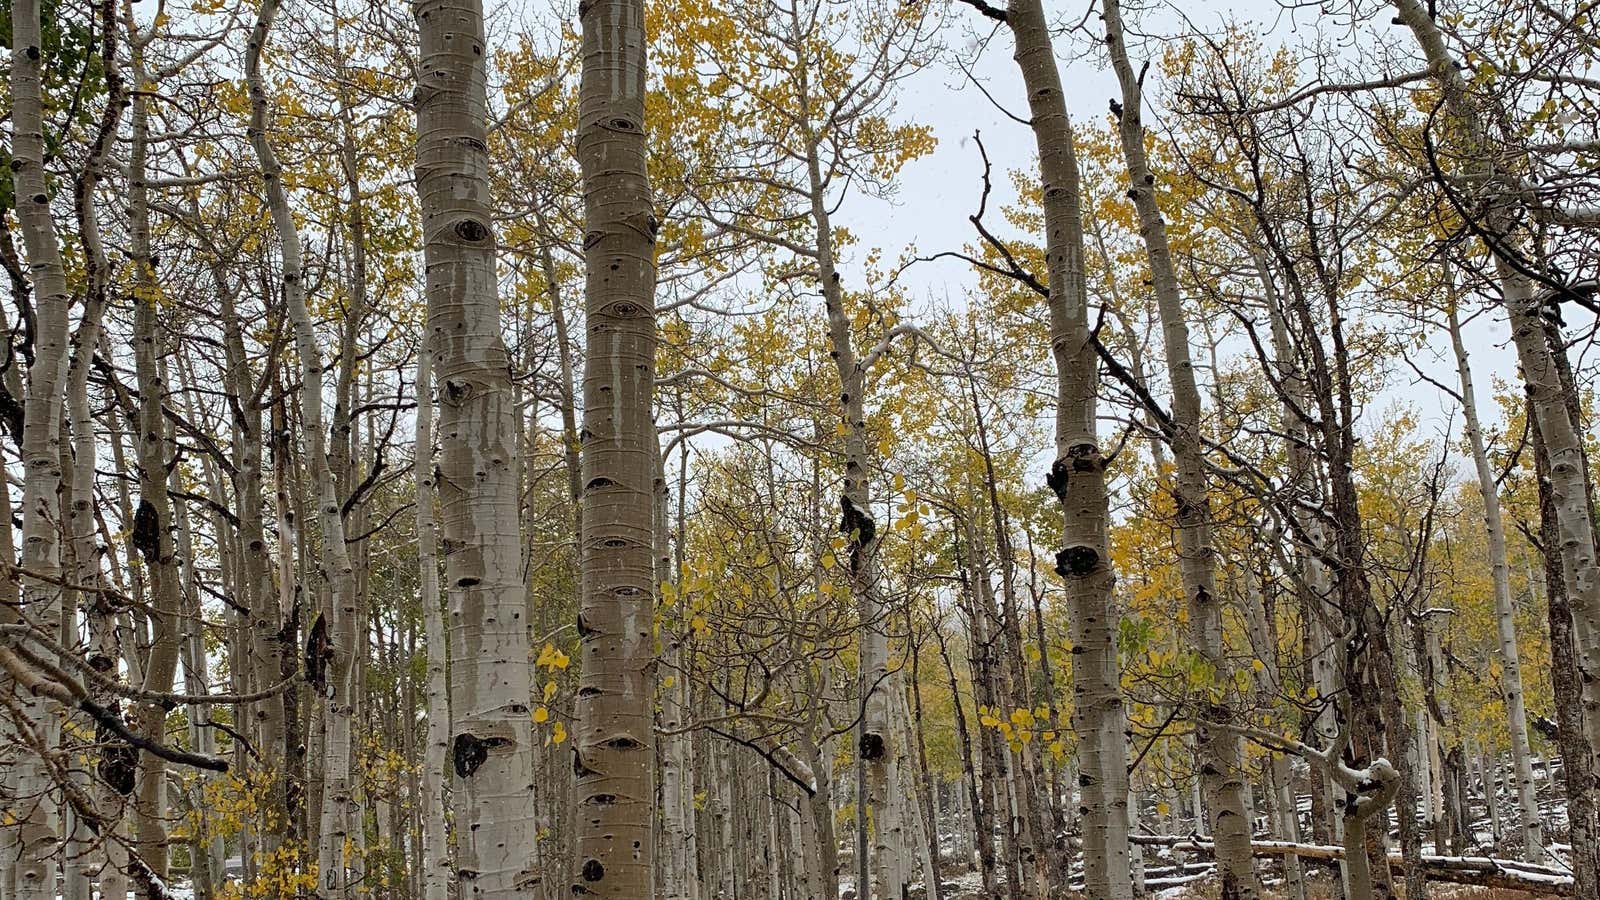 The colony of clones of the quaking aspen haven’t been reproducing as they should be.